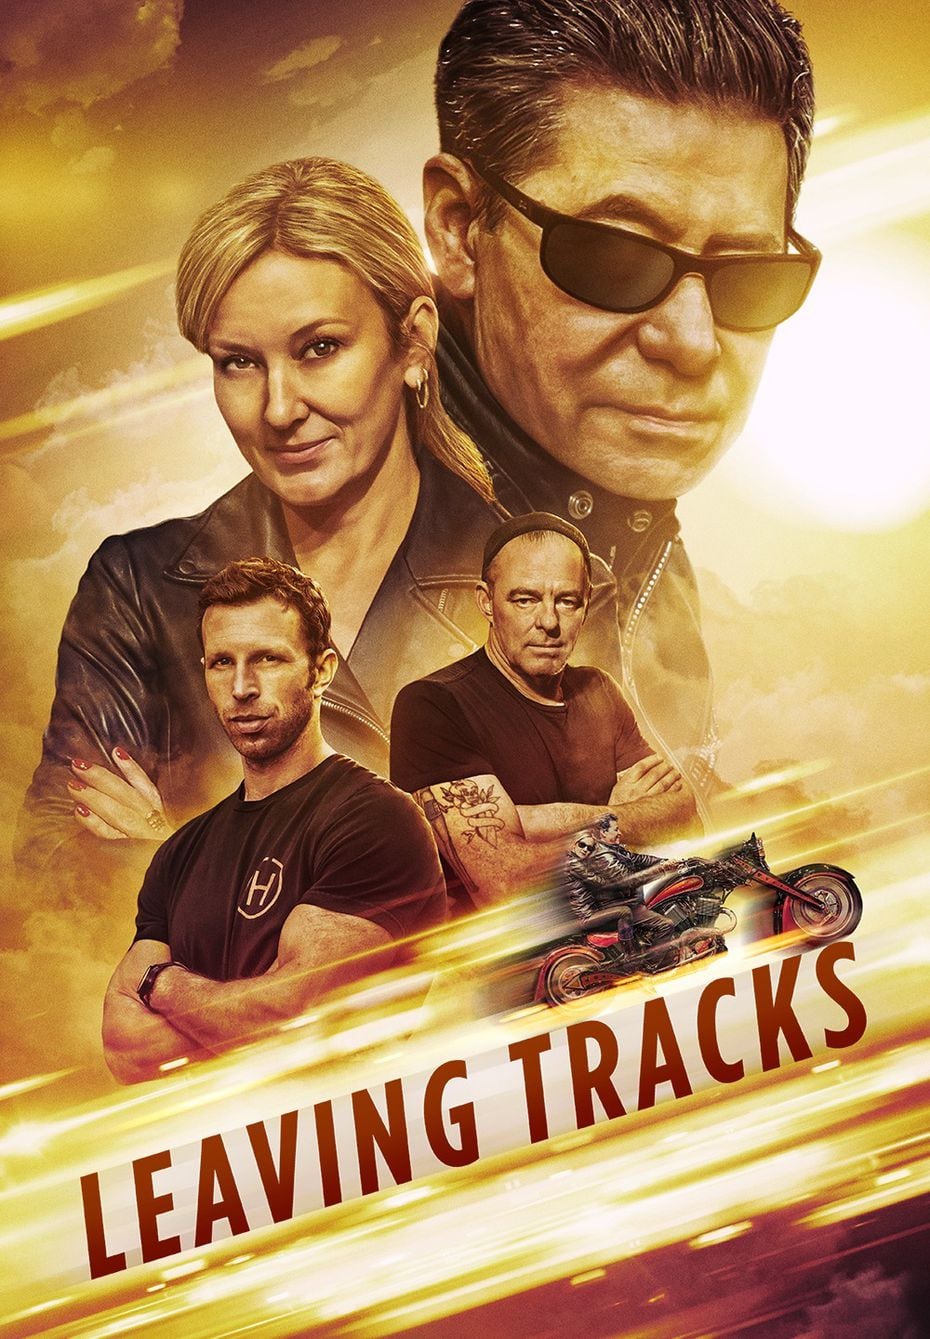 The Leaving Tracks movie poster features co-executive producers Stacey Mayfield and Bobby Haas with custom motorcycle builder stars Max Hazan (lower left) and Craig Rodsmith.